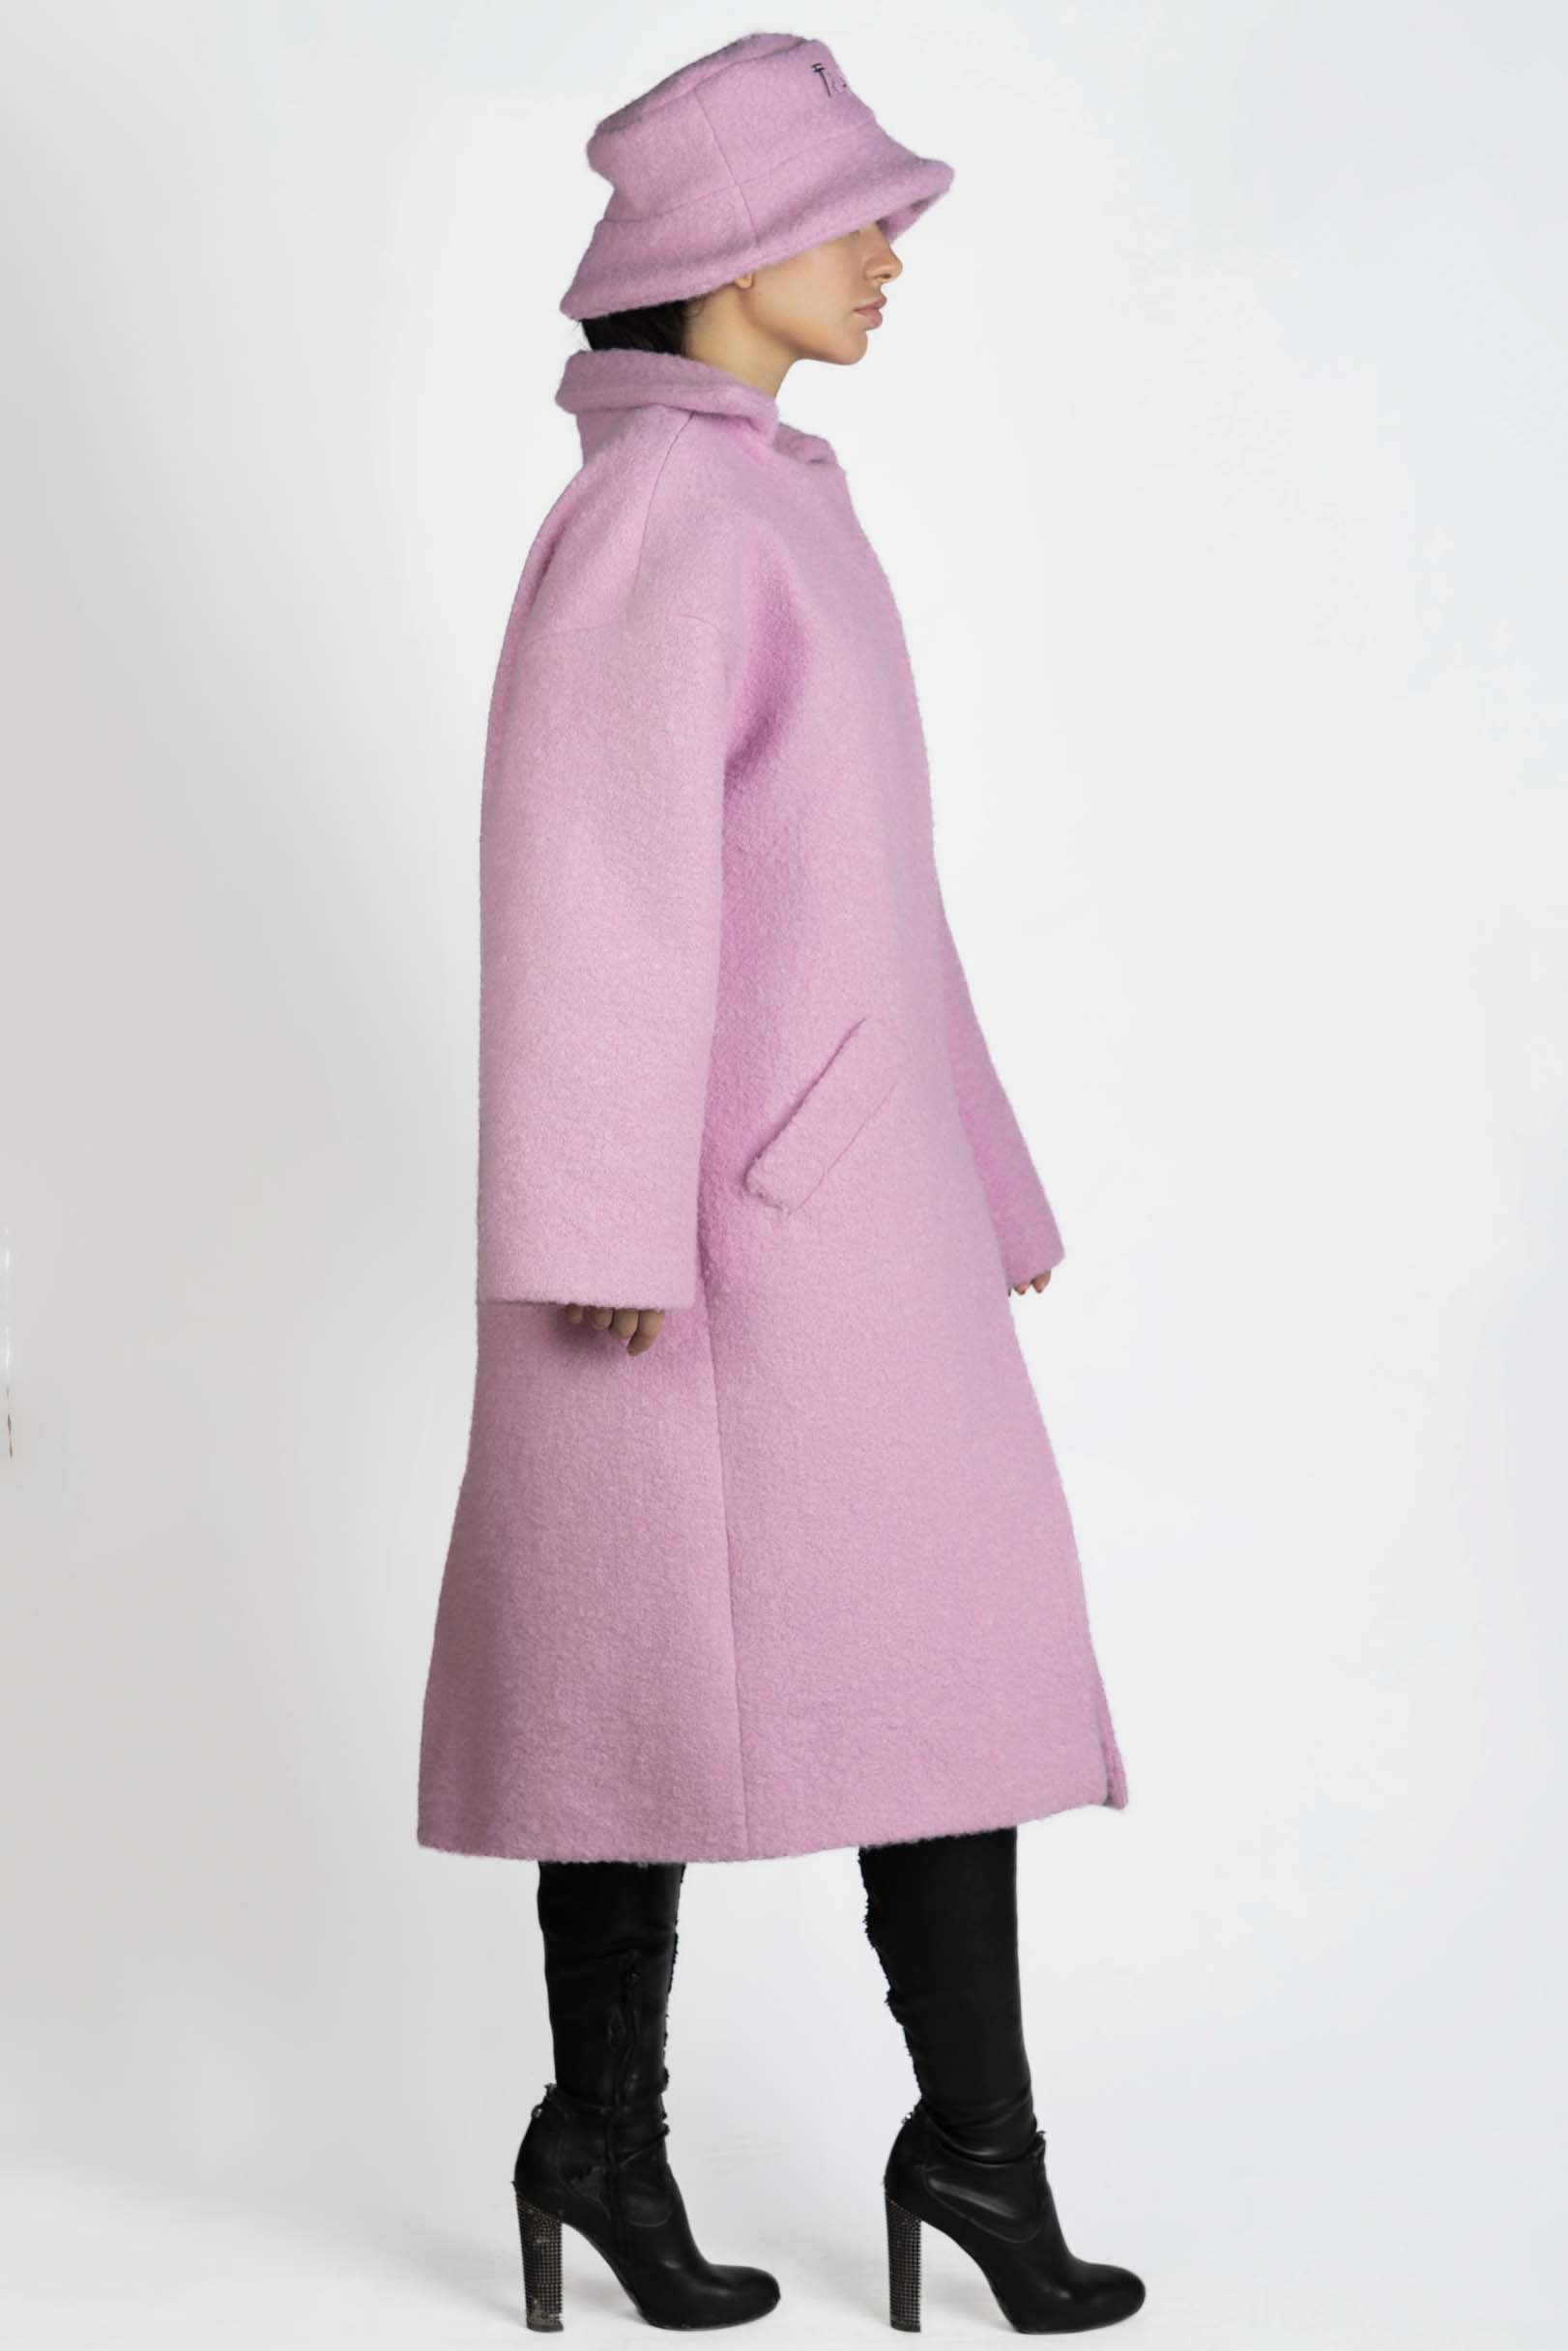 Wool Coat in Pink with long sleeves, pockets and magnetic-button fastening. Side photo.